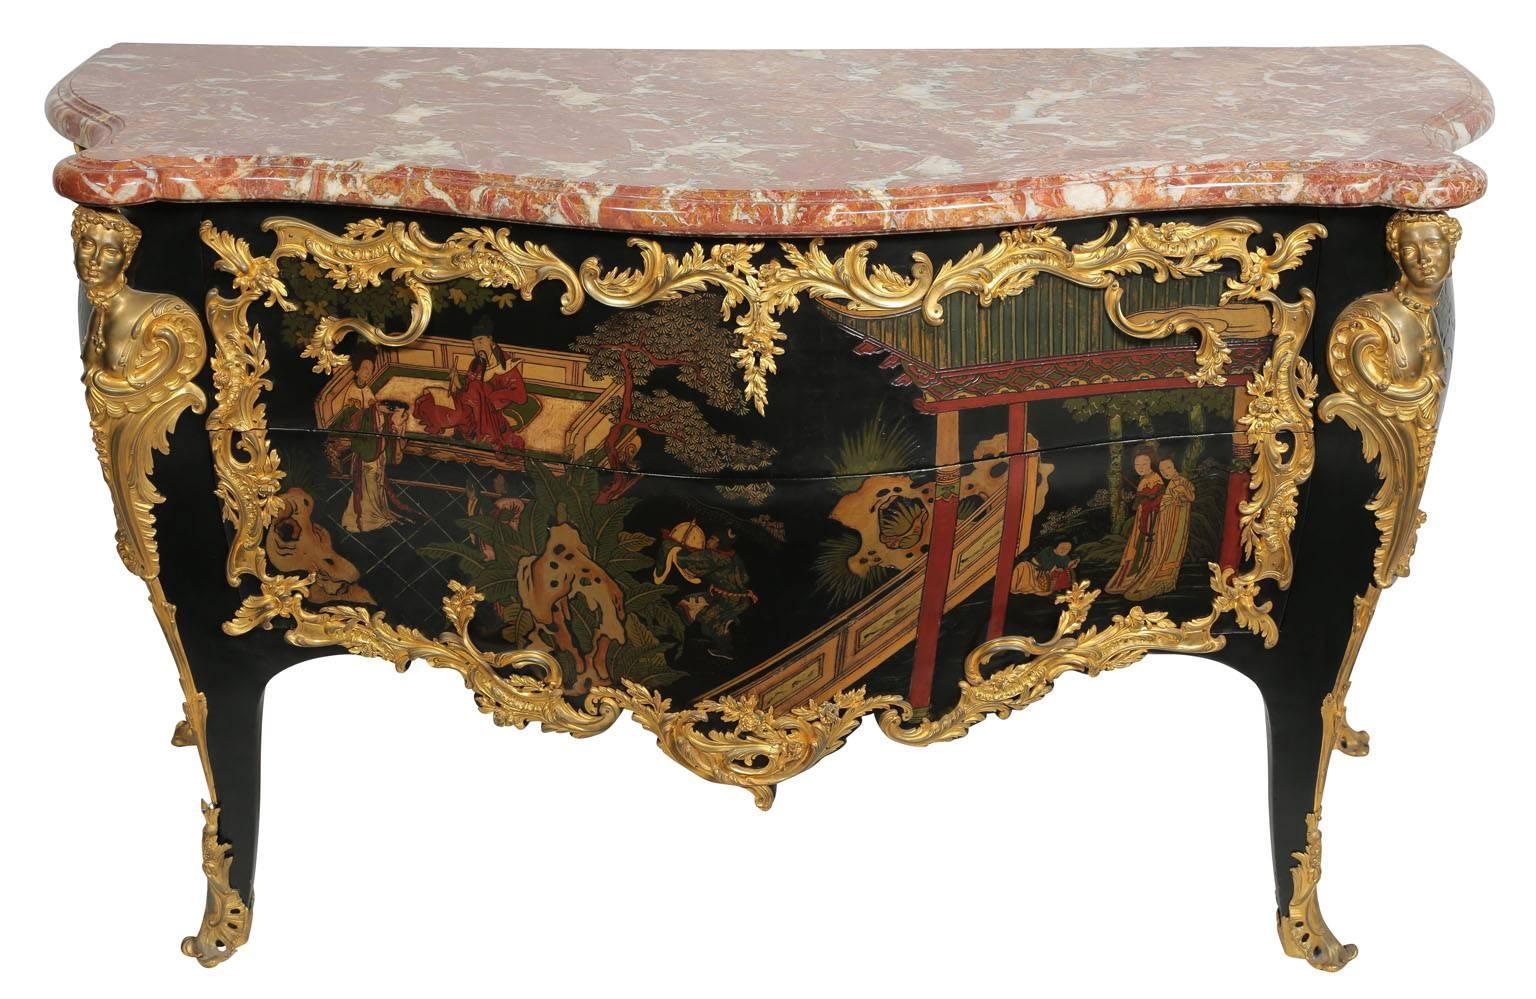 French Palatial Louis XV Style 19th Century Gilt Bronze-Mounted Chinoiserie Commode For Sale